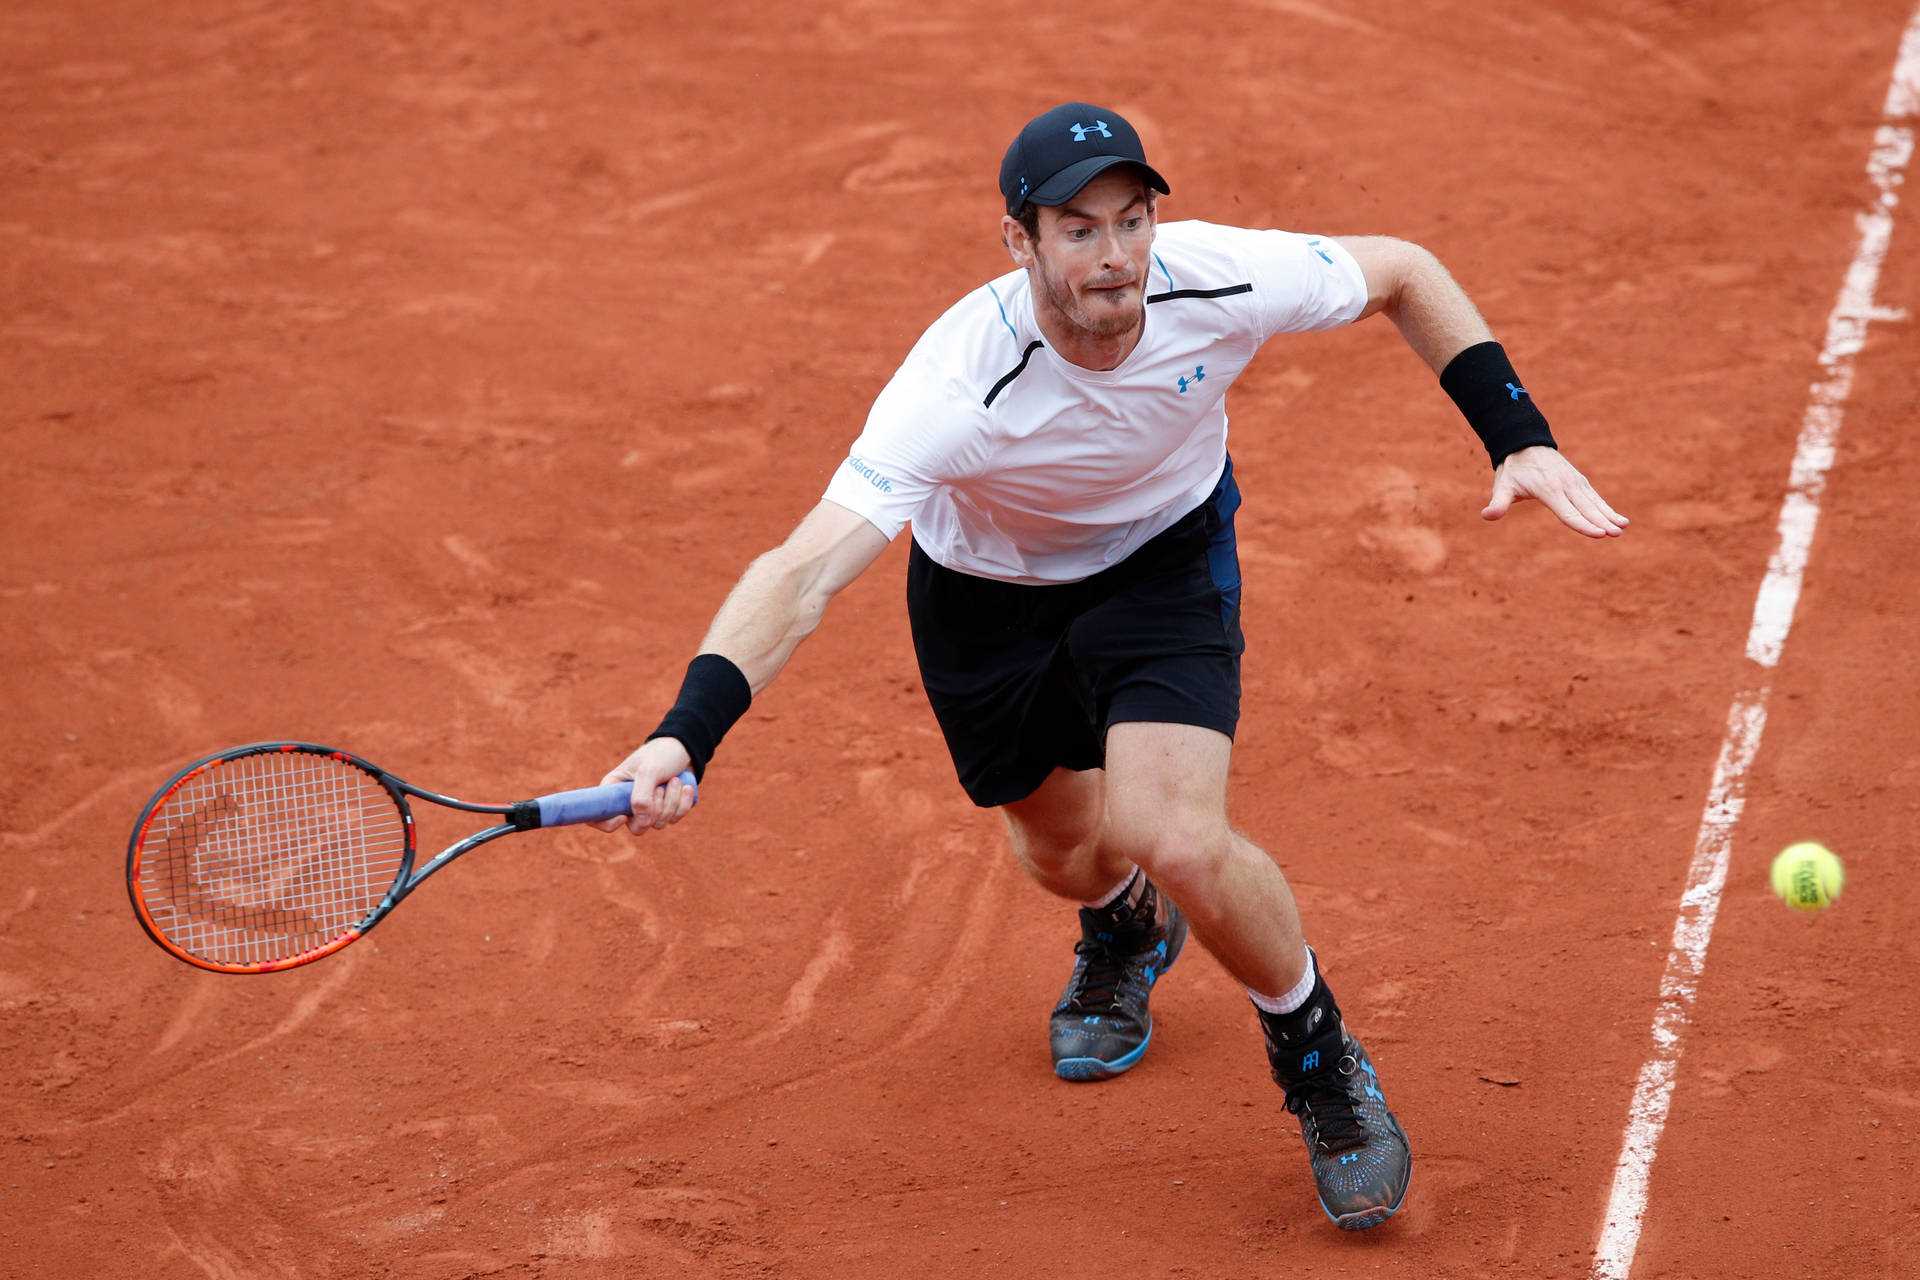 Caption: "Andy Murray in Action - Aiming for the Forehand Drive" Wallpaper